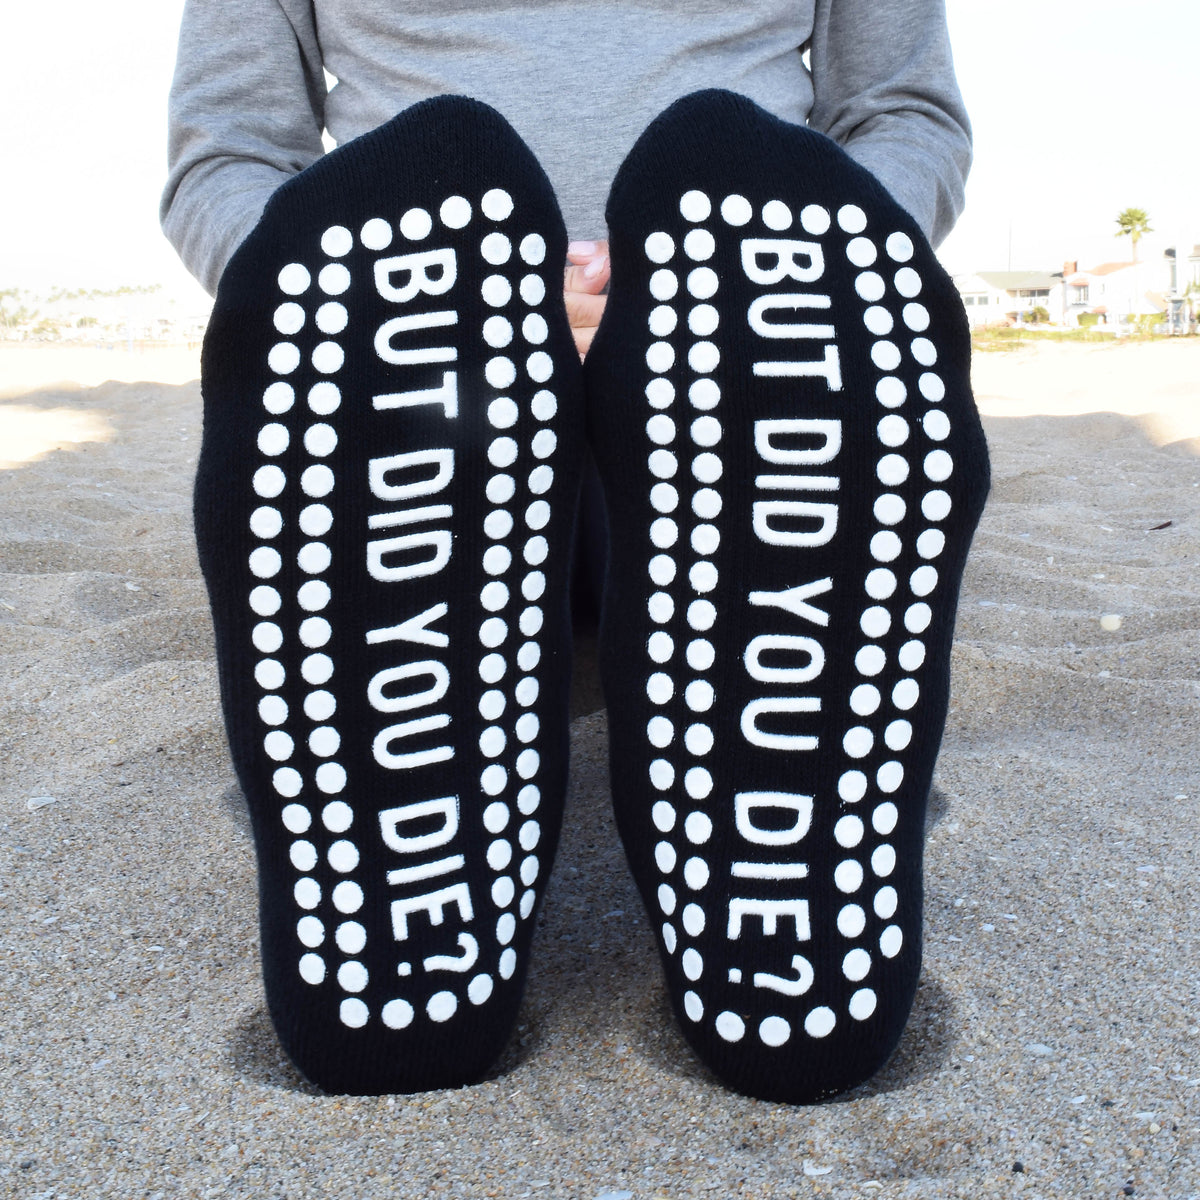 But Did You Die? - Sticky Socks for Barre, Pilates, Yoga – Life by